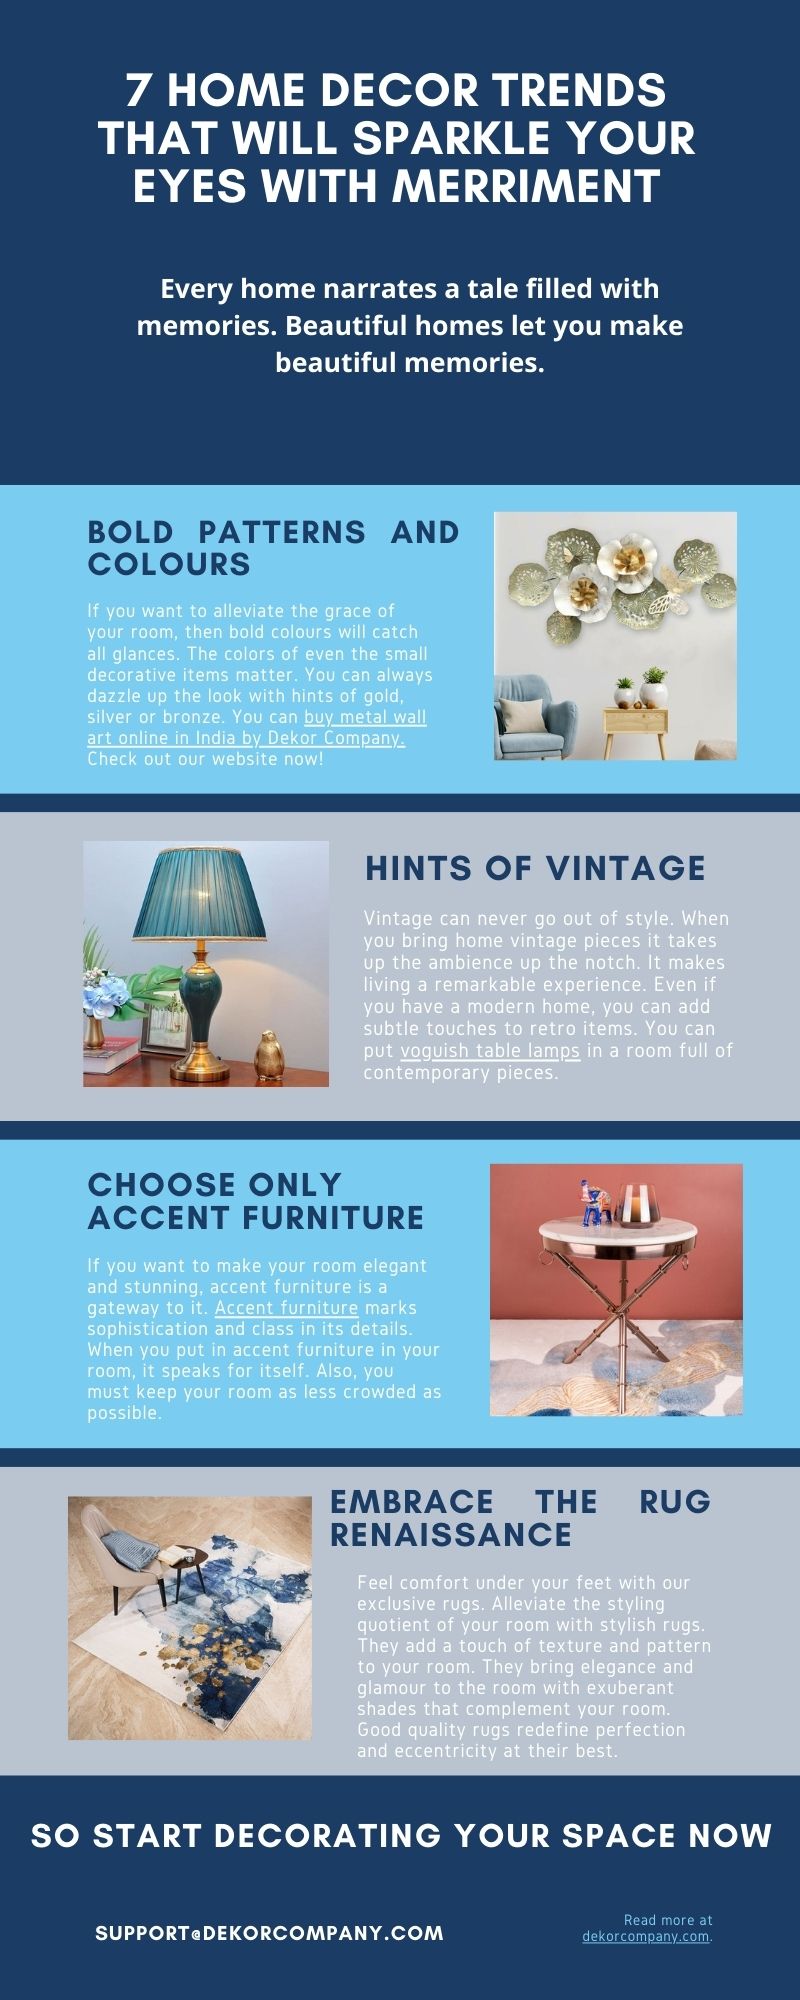 7 Home Decor Trends That Will Sparkle Your Eyes With Merriment